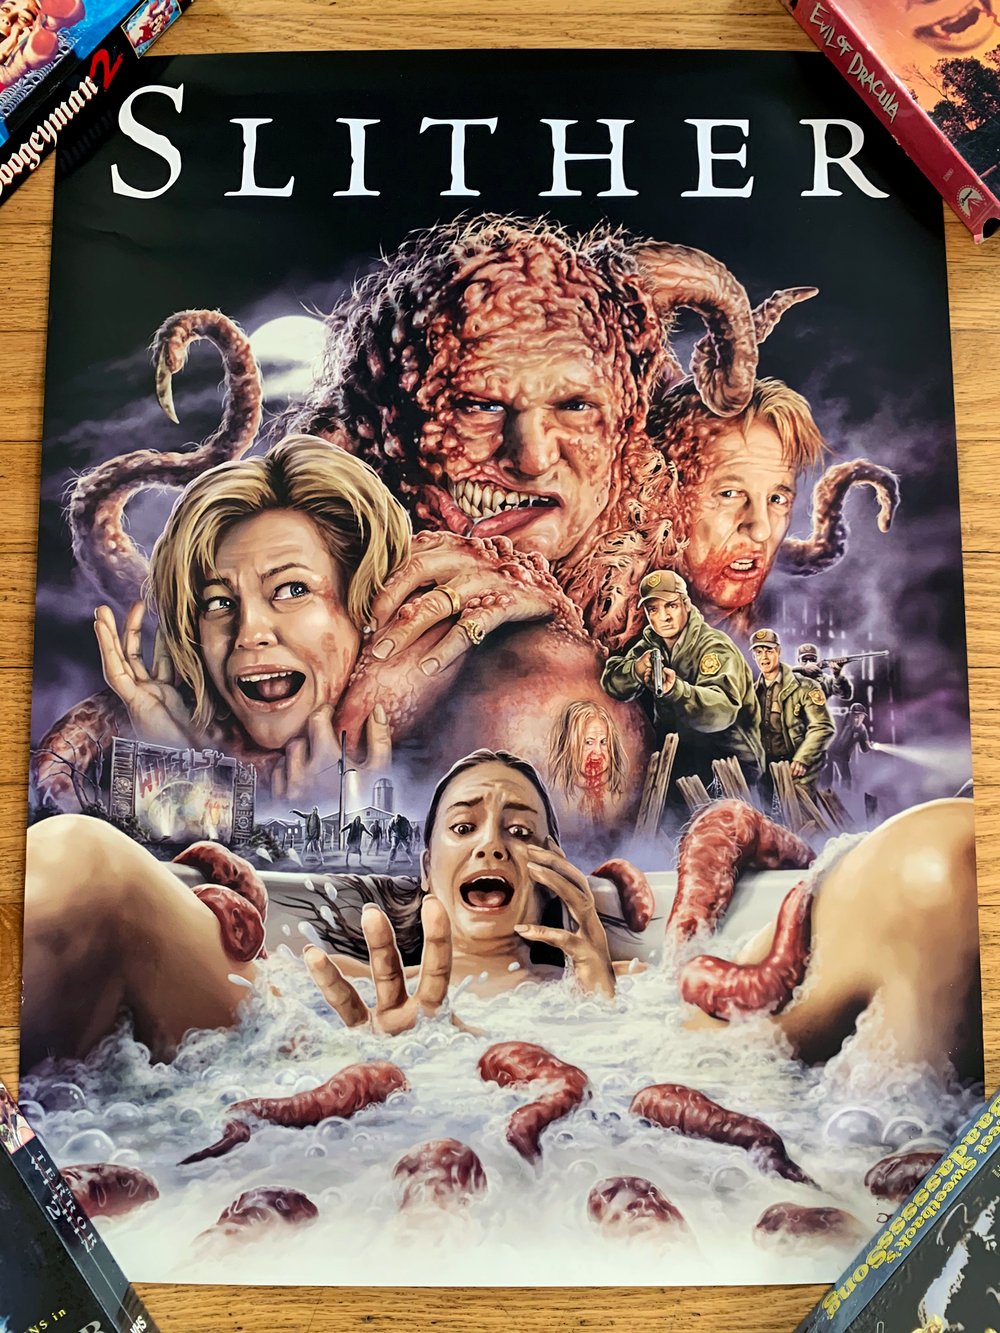 SLITHER Shout Factory Limited Edition Promotional Poster